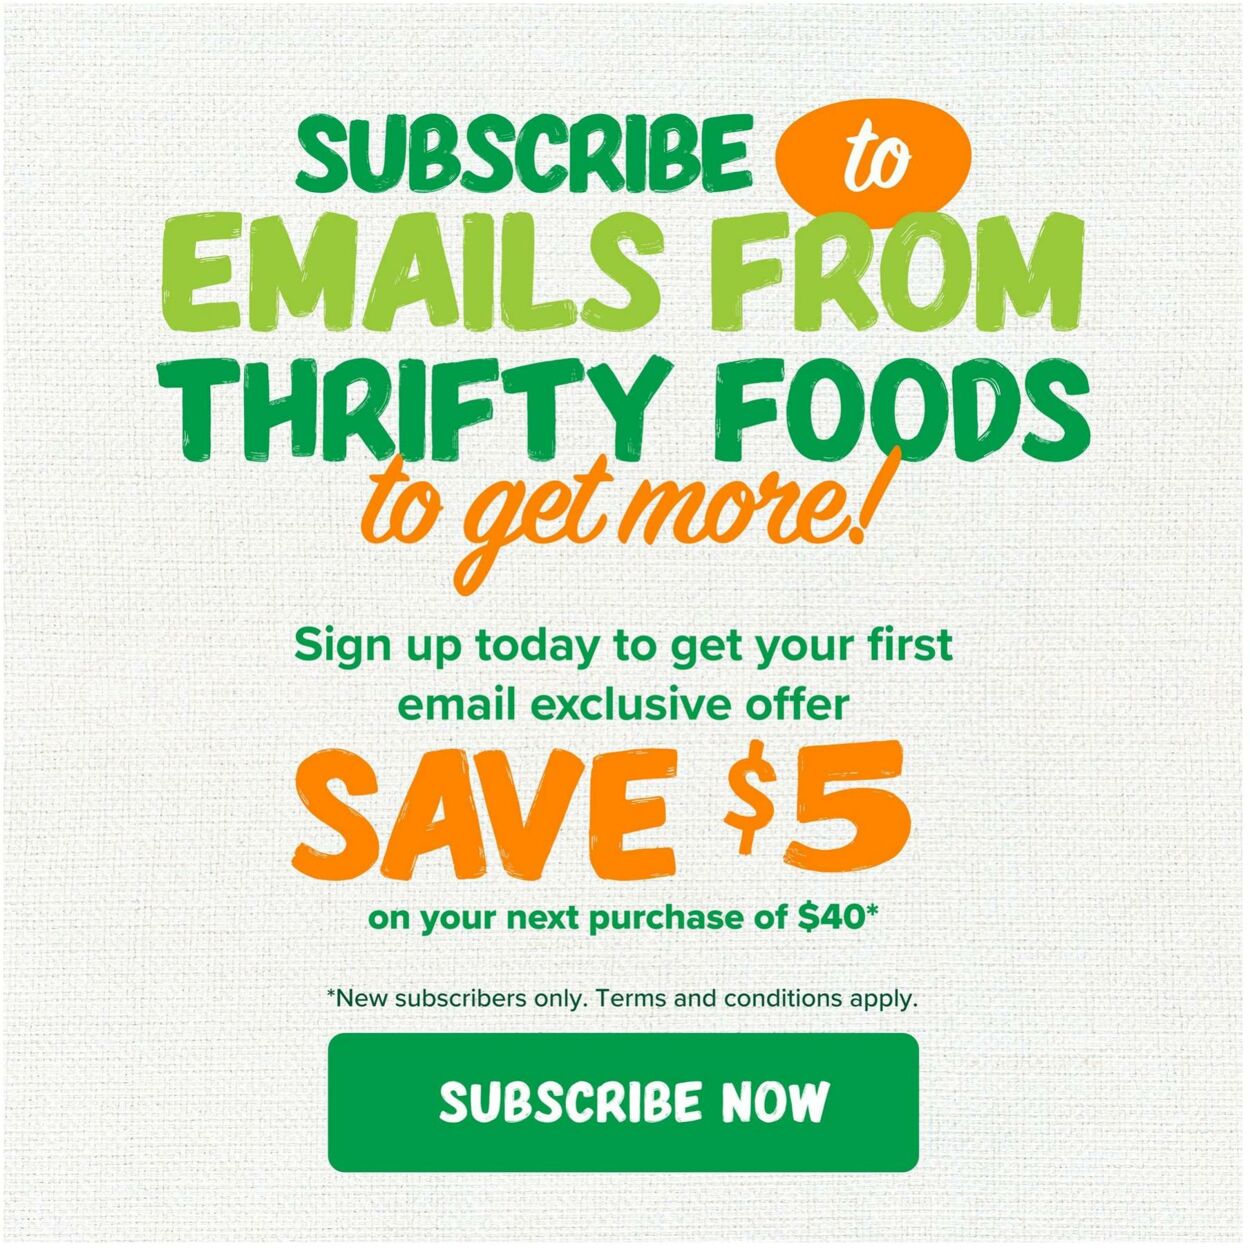 Flyer Thrifty Foods 27.04.2023 - 03.05.2023